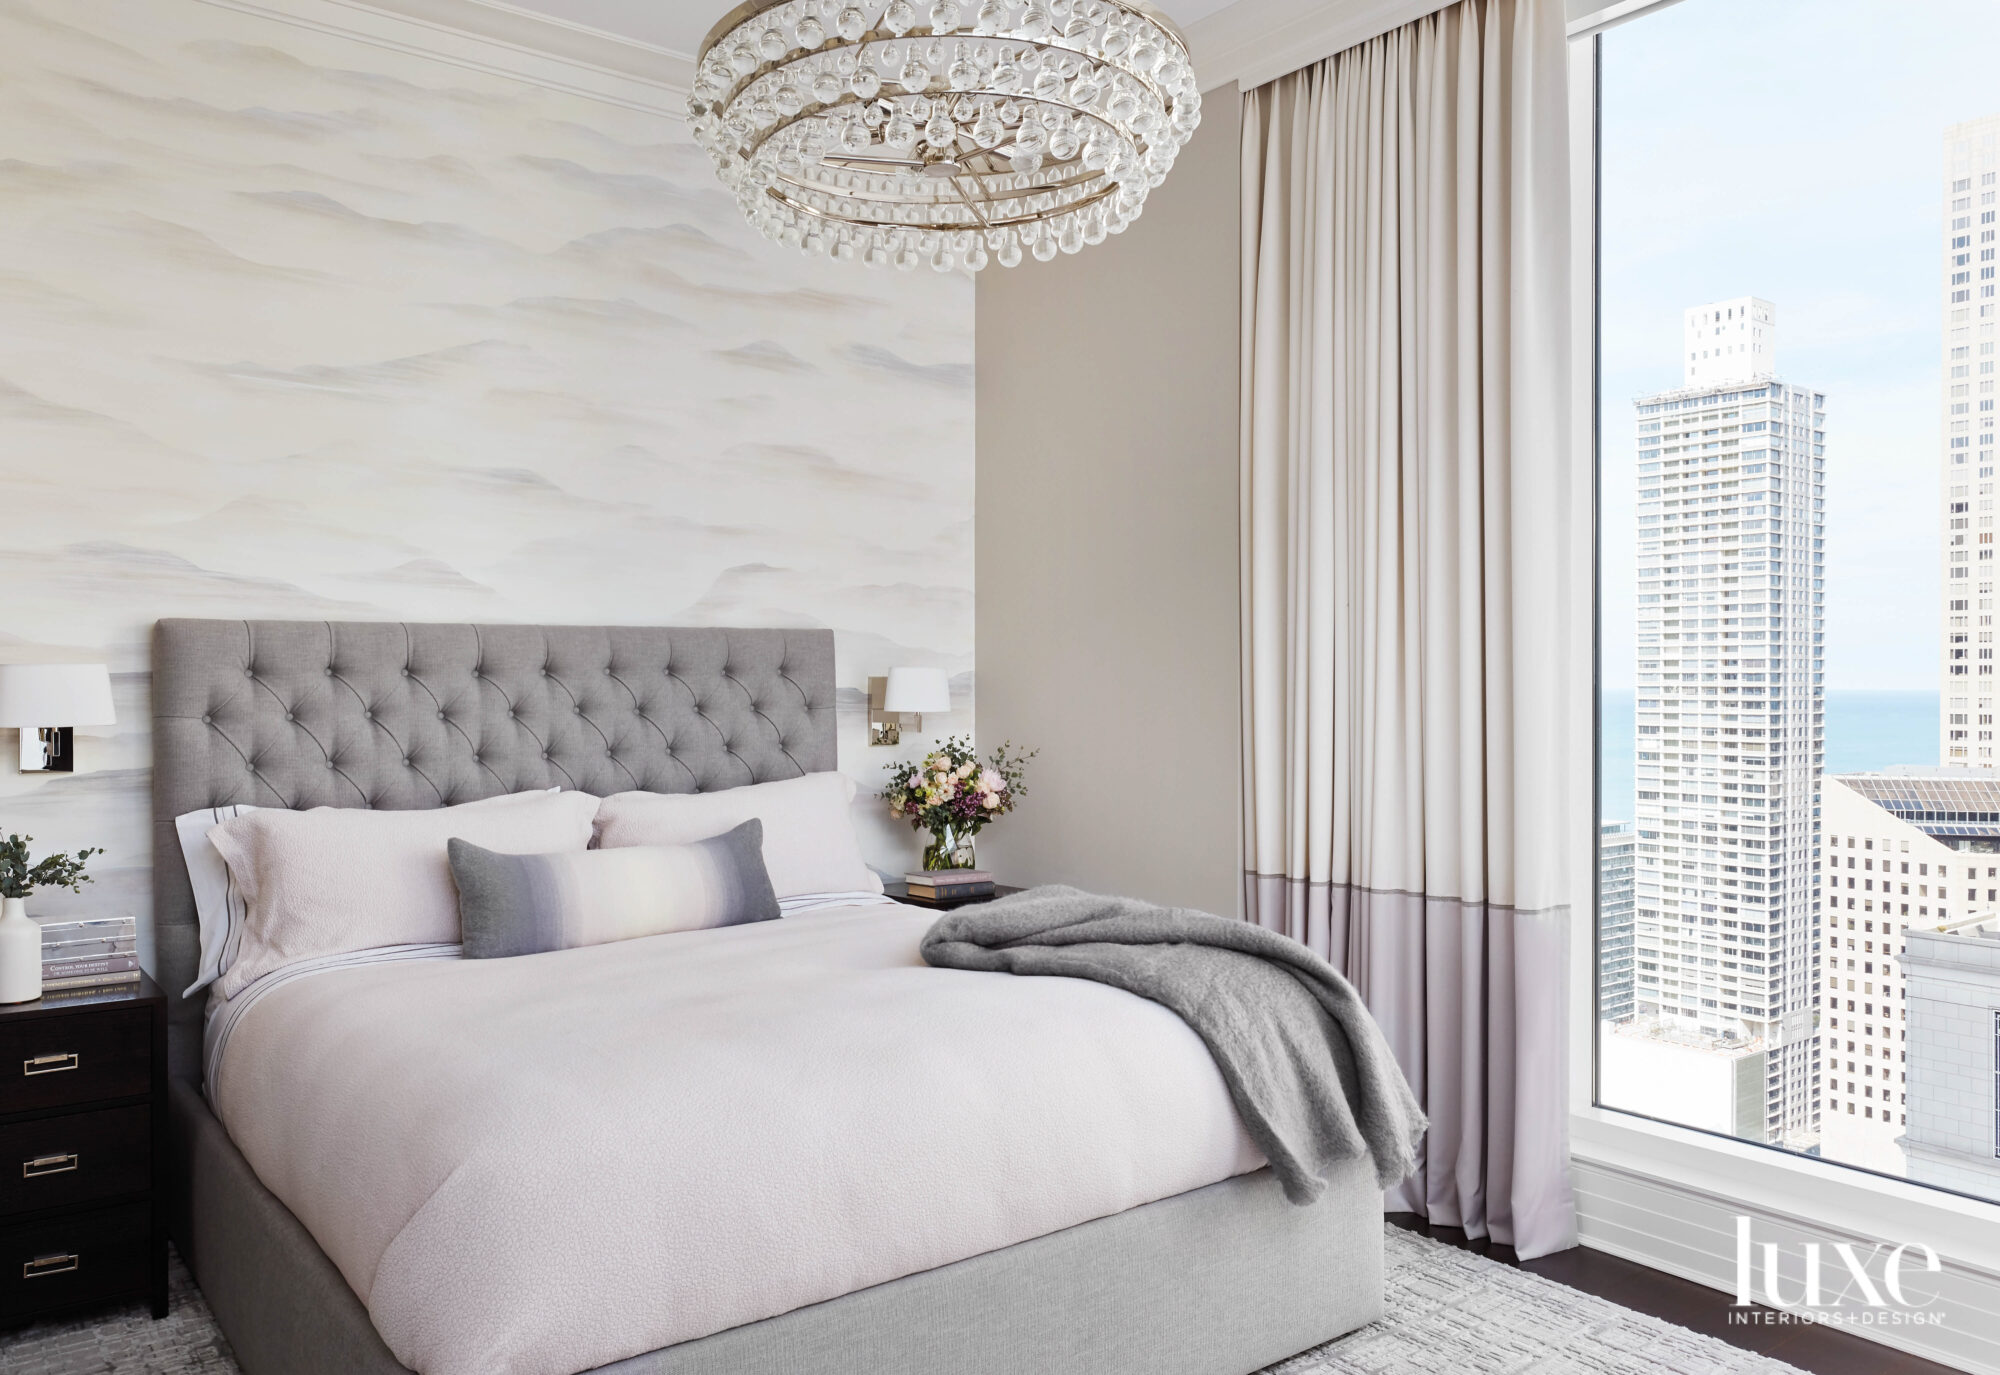 A bedroom with a gray bed, cloud wallpaper and a crystal chandelier. It looks out on the city of Chicago.